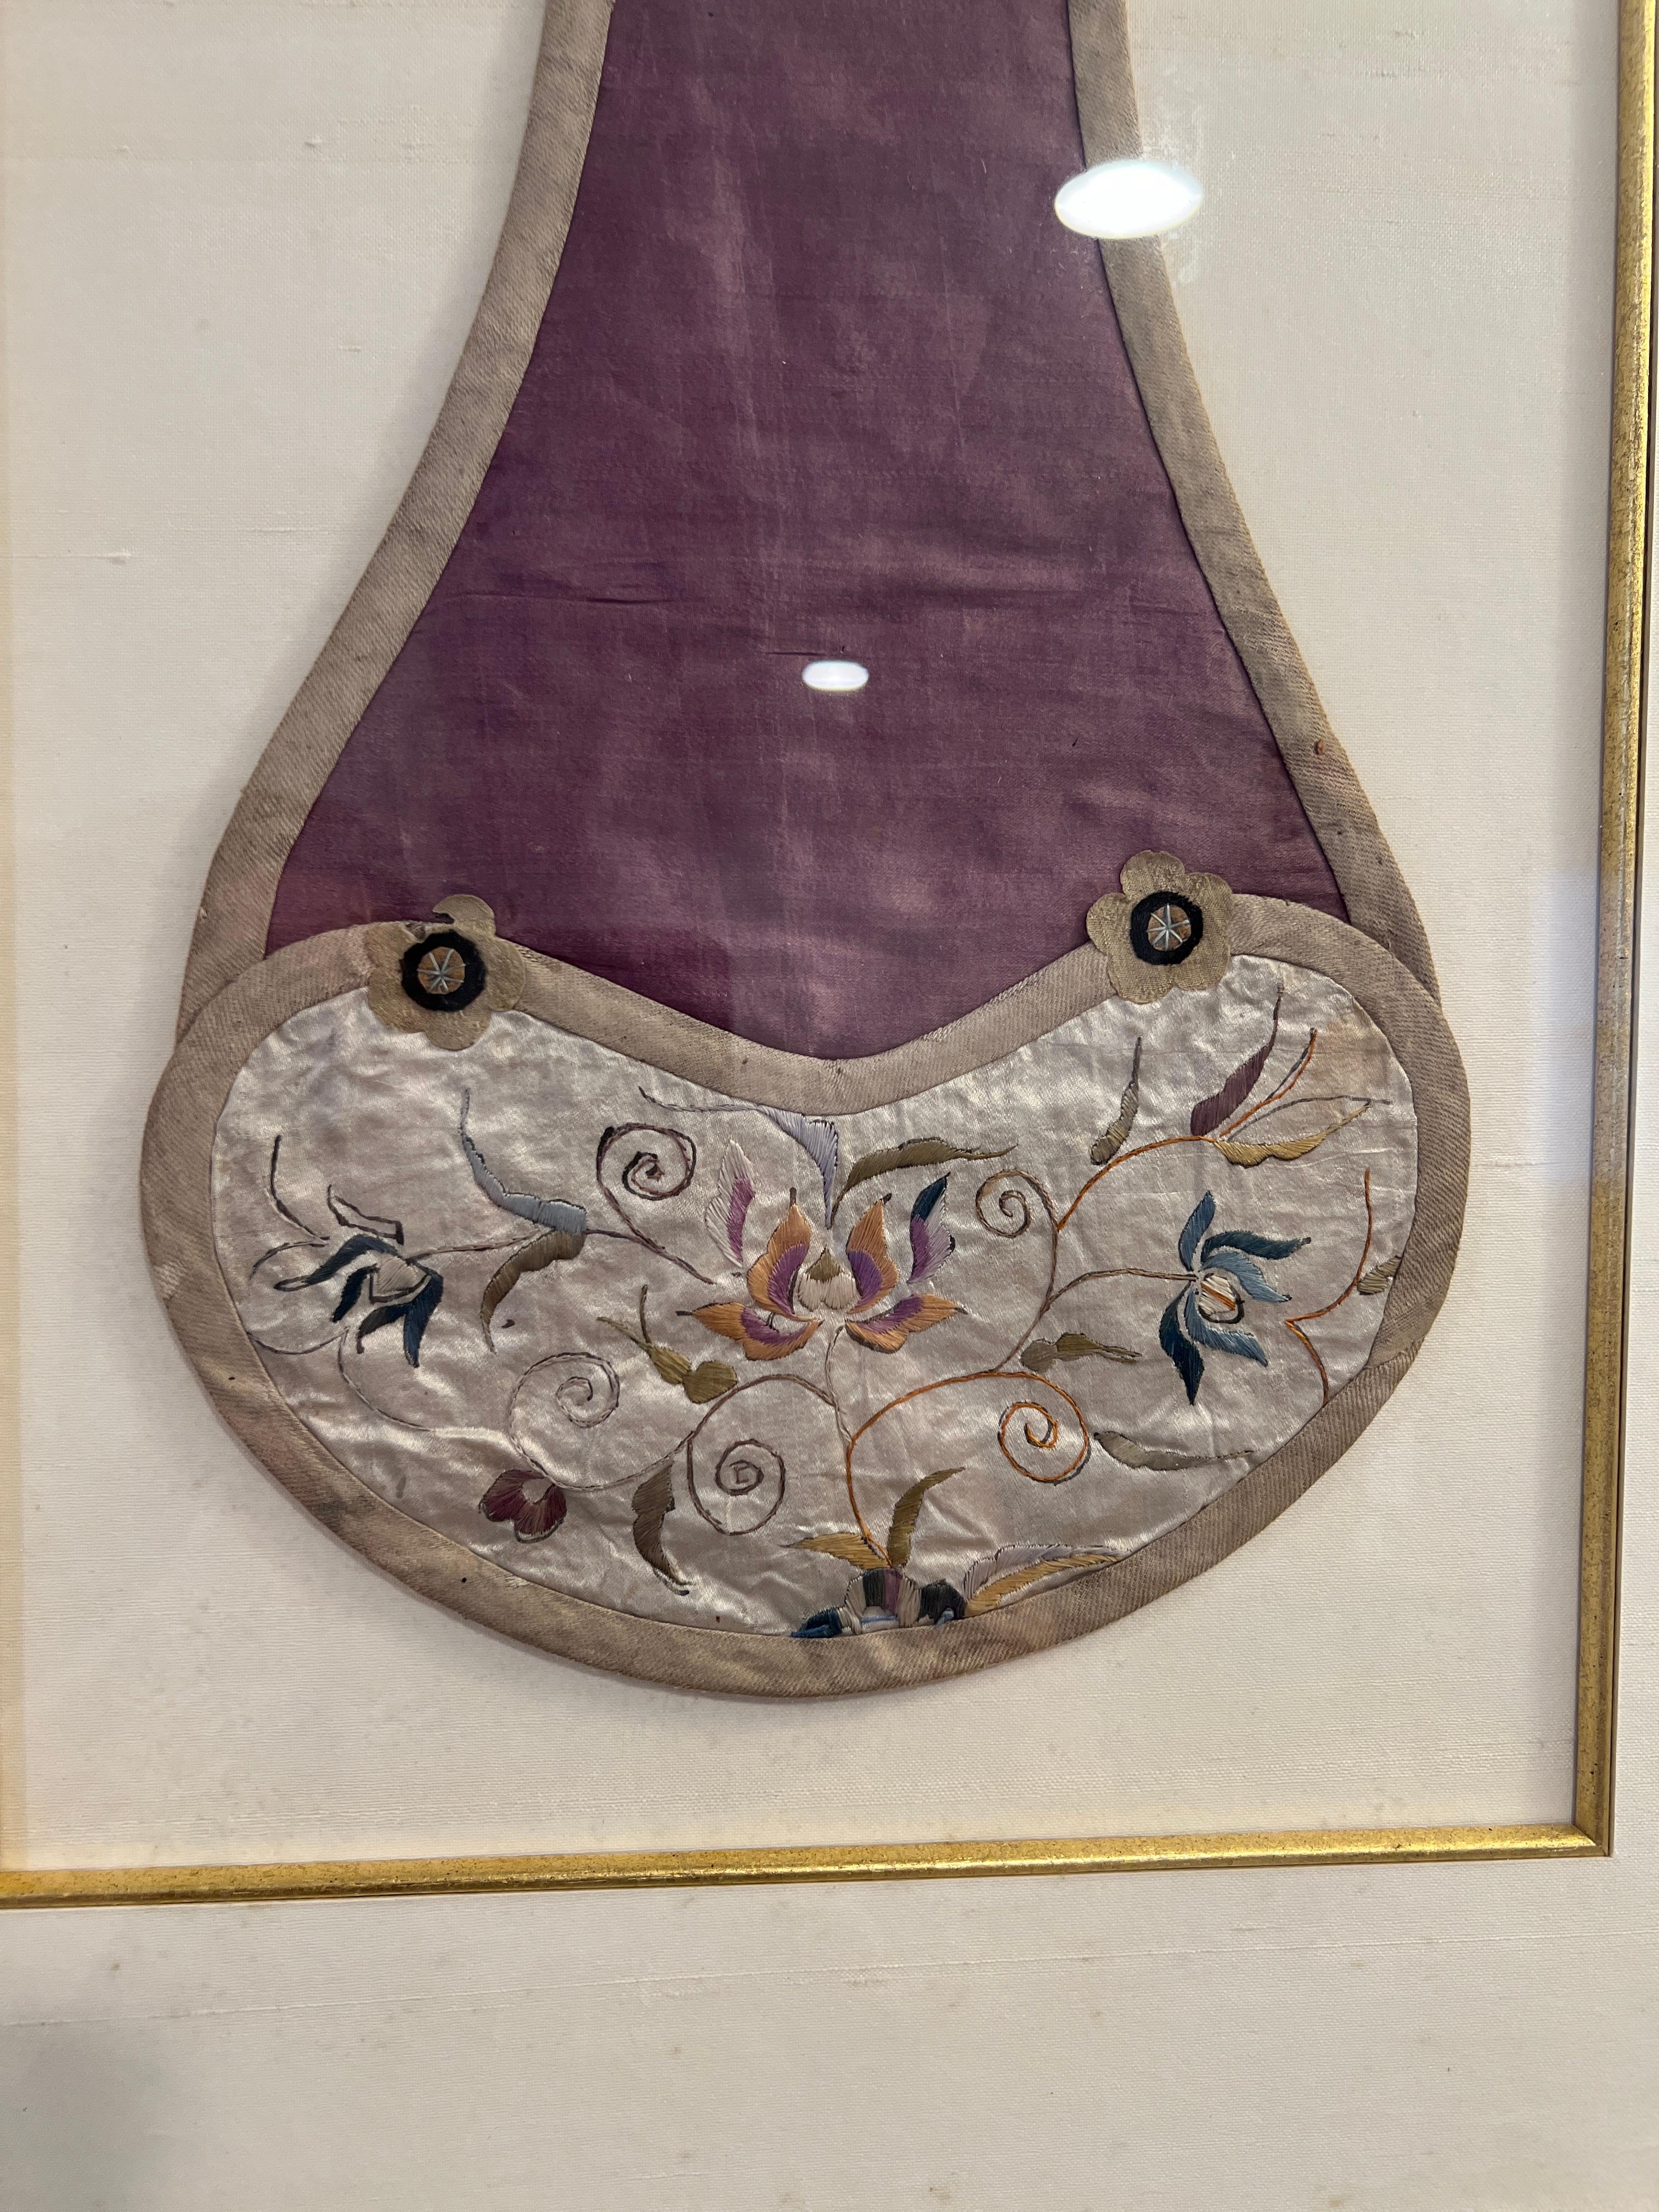 Chinese Qing Dynasty (1644-1911), 19th century. 

Step into the lavish world of the Qing Dynasty with this exquisite antique Chinese Silk Embroidery Child's Bib. Embellished with a foliate motif and scholar motifs stitched into the trim, this panel